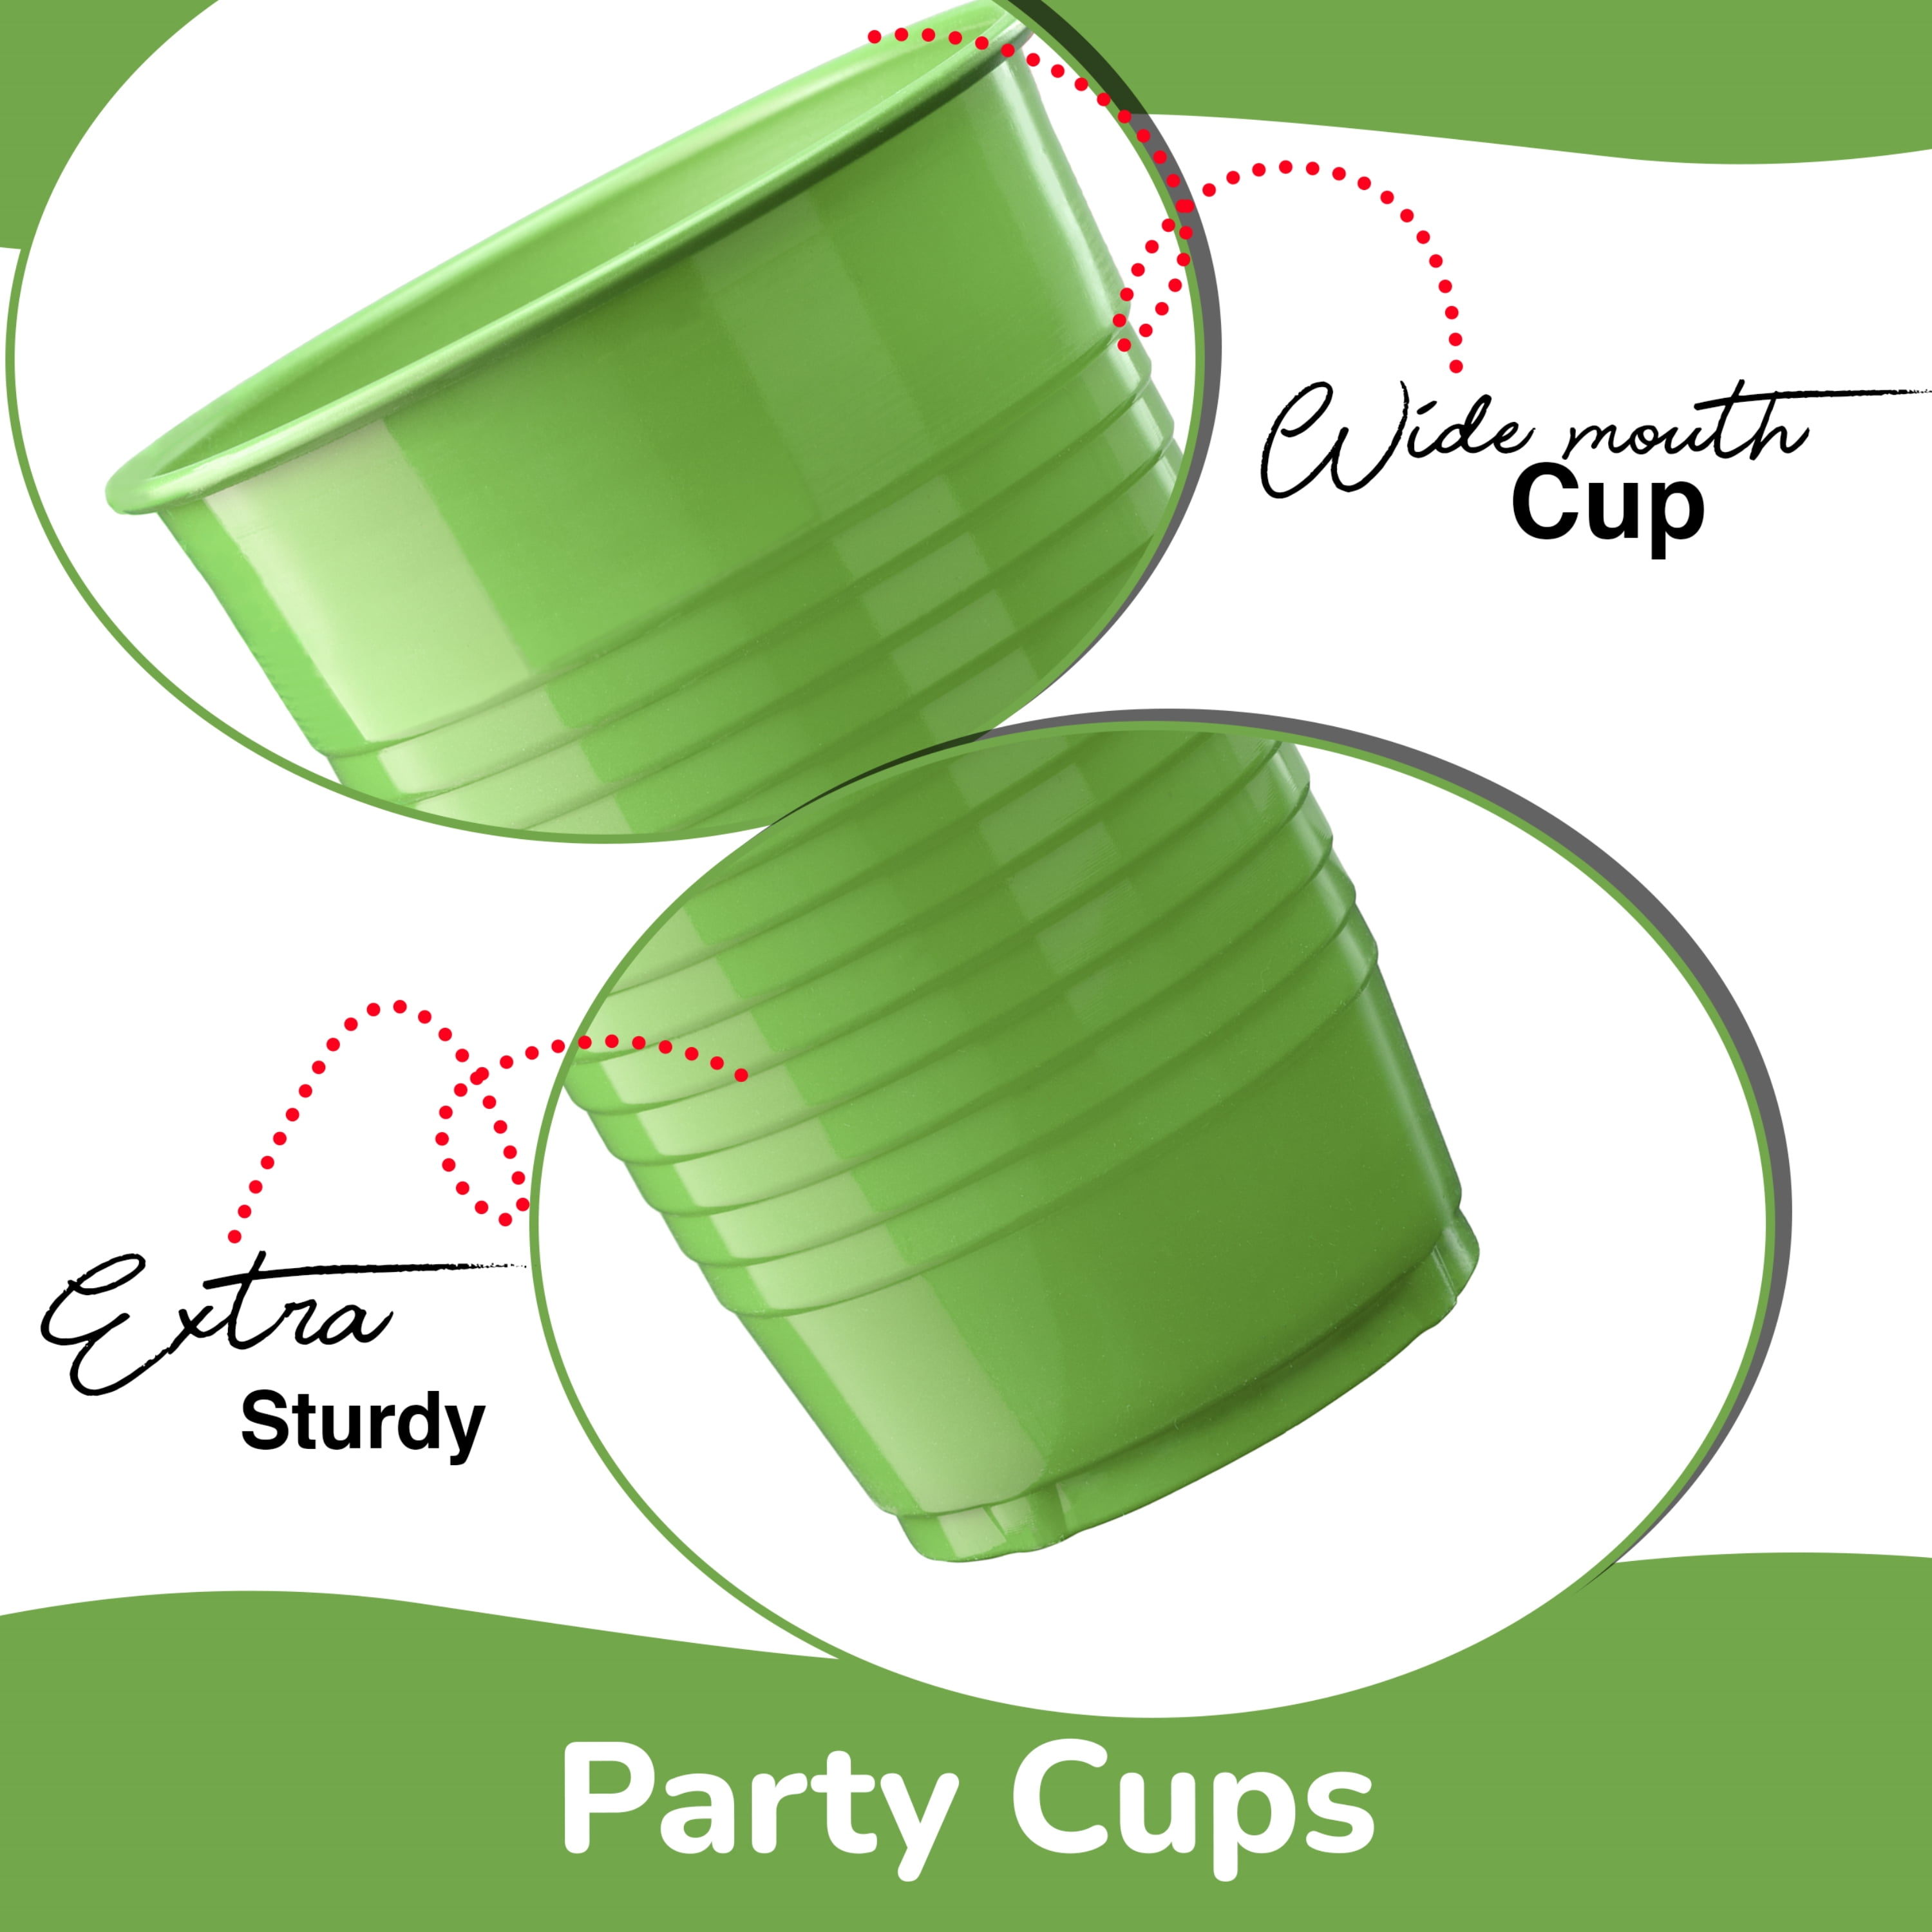 Exquisite 12 oz Lime Plastic Cups II 50 Count Bulk Pack Disposable Party  Cups II Premium Quality Plastic Tumblers for Parties